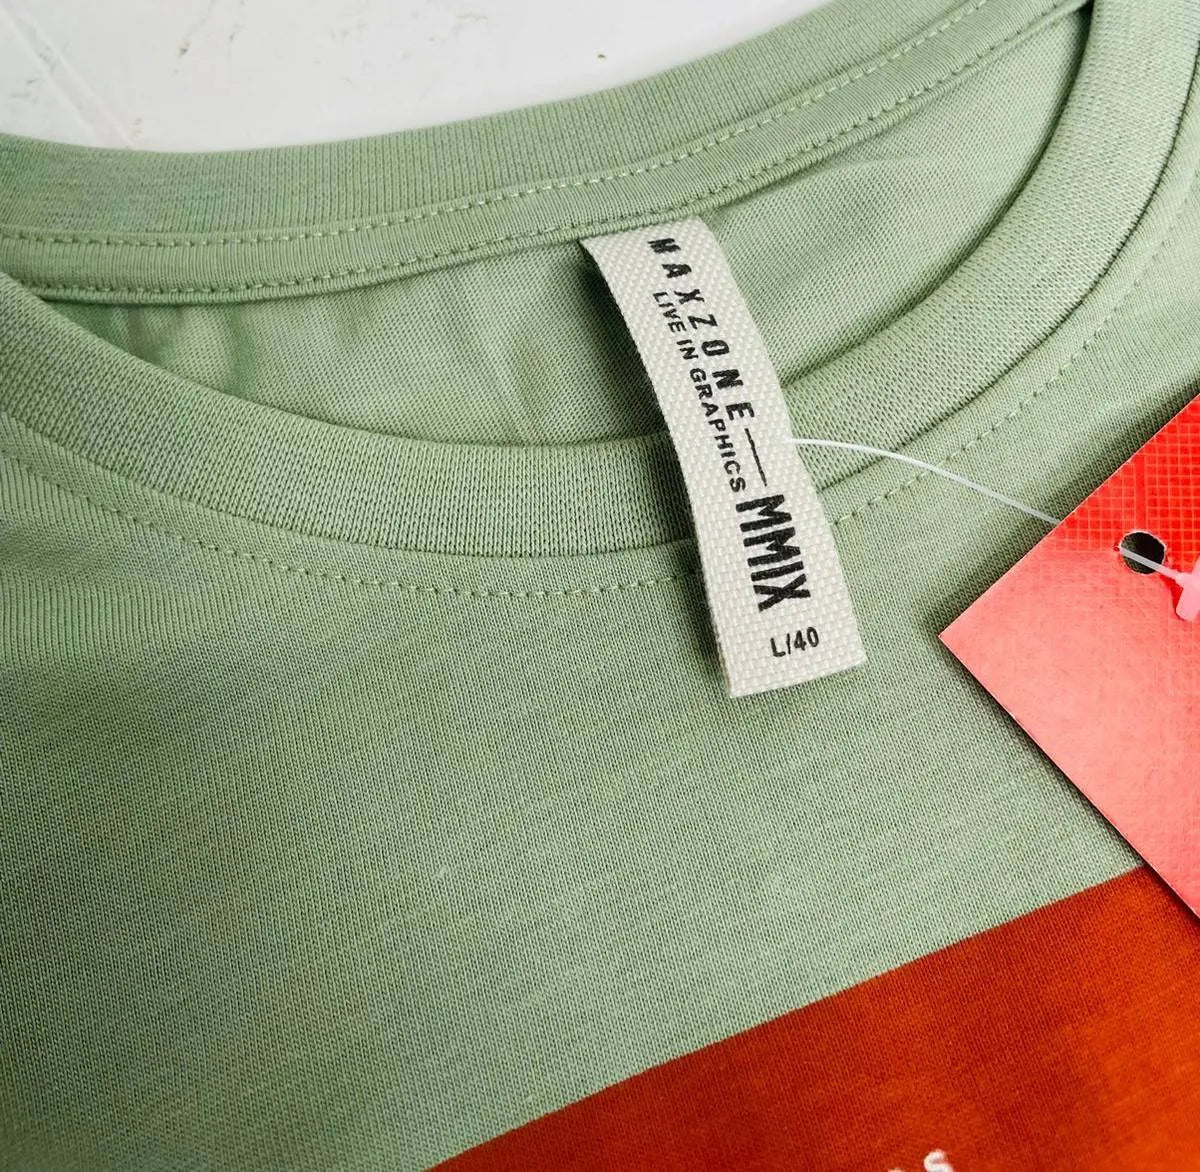 Stand out with style: Maxzone graphic tee, light olive, men's fashion.Experience a blend of comfort and style with the Maxzone light olive graphic t-shirt, crafted from soft fabric.